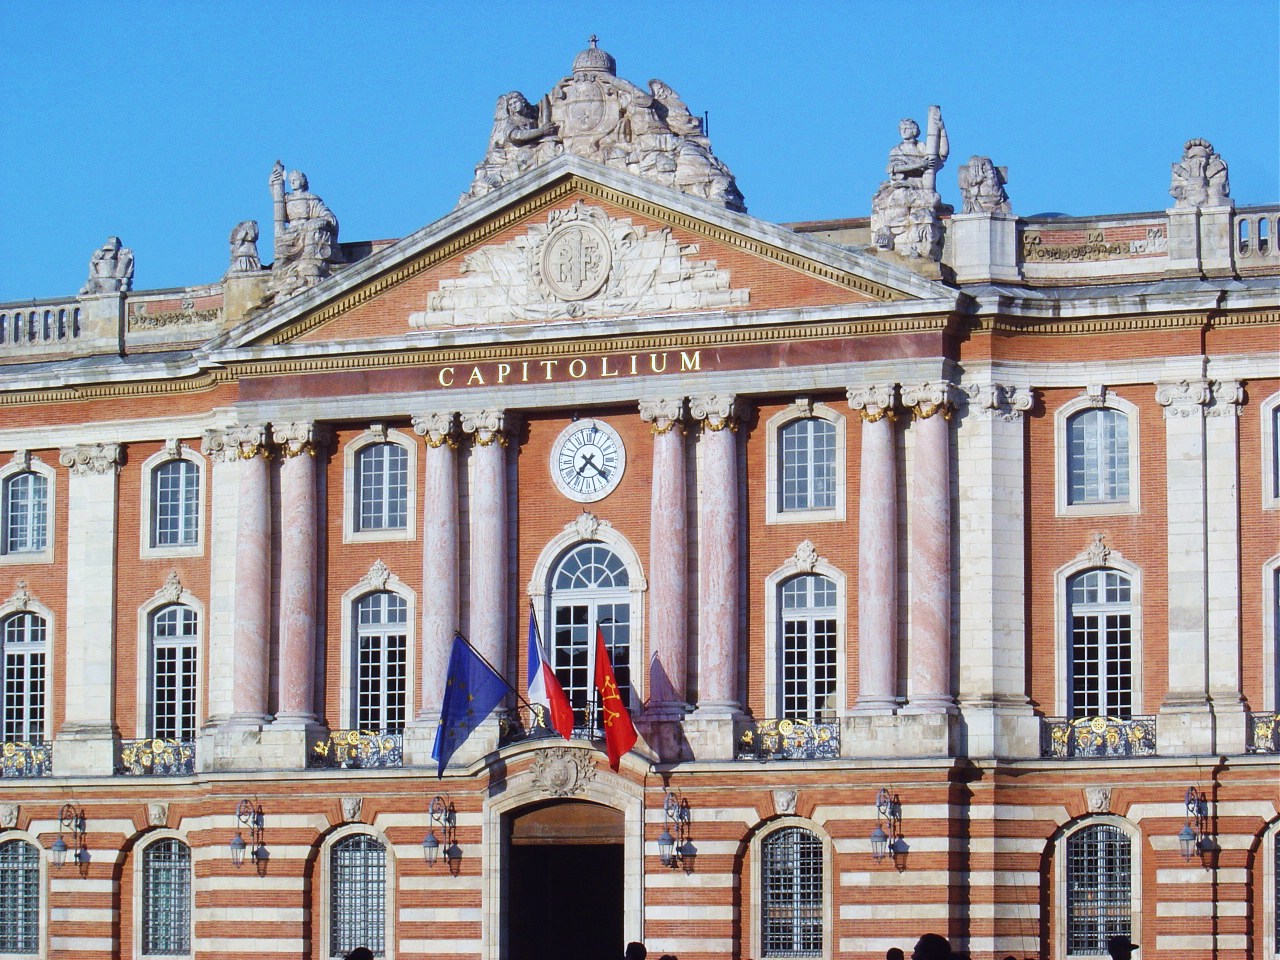 TOULOUSE - THE PINK CITY: The Capitole - Henri IV court - Toulouse - france